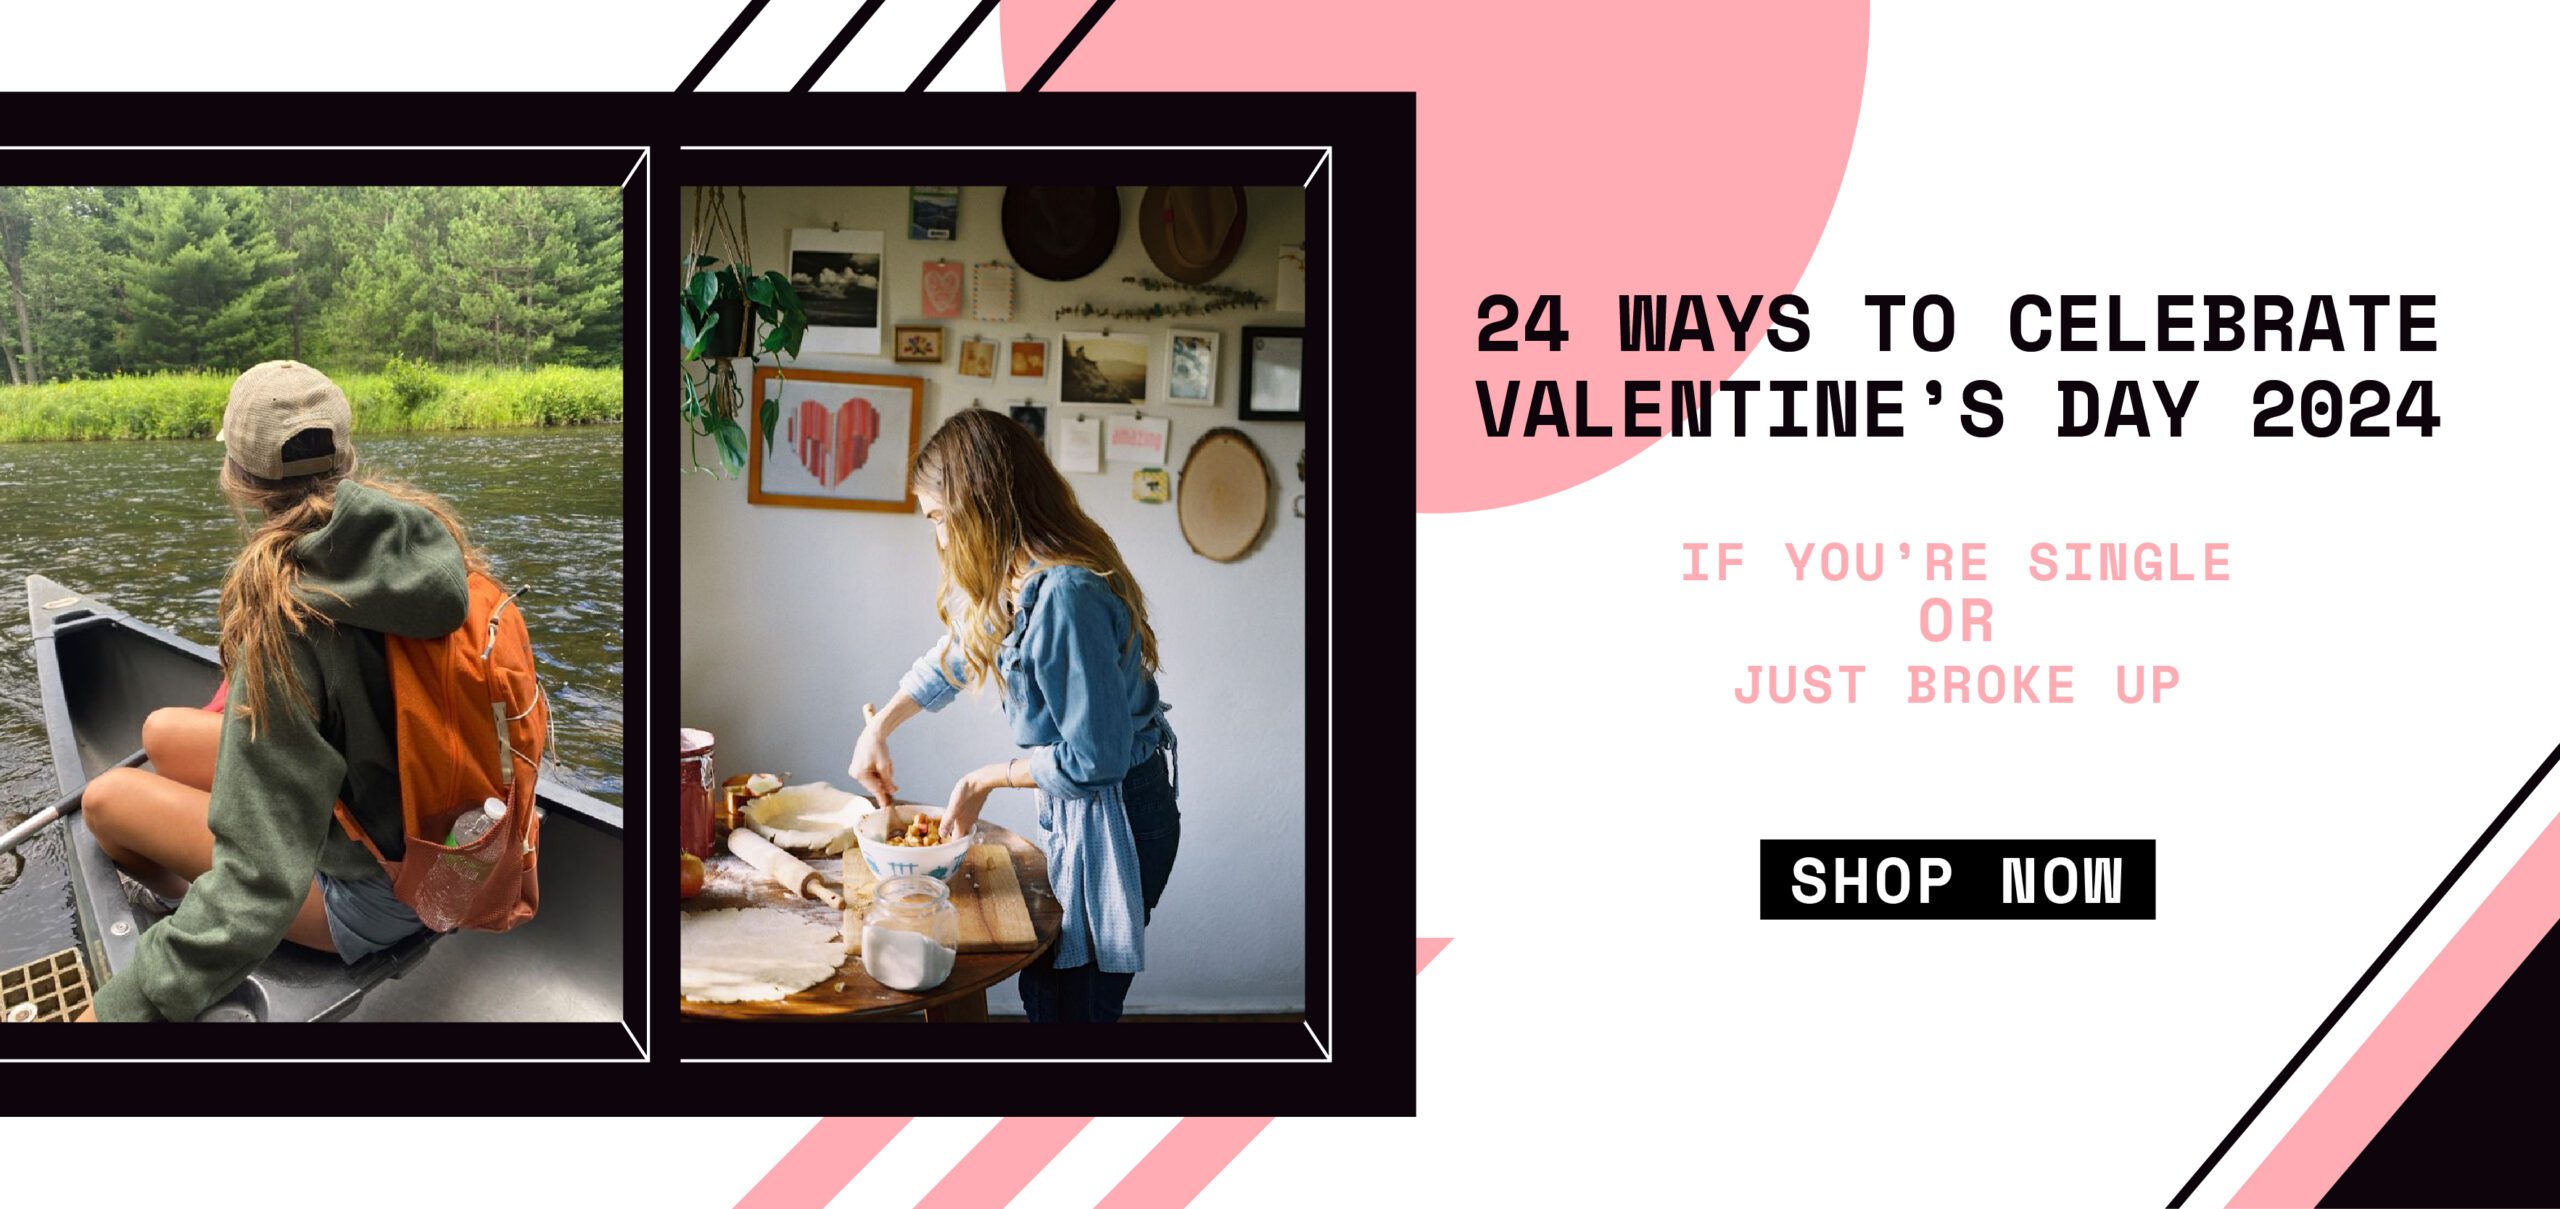 24 ways to celebrate valentine's day if you're single or just broke up